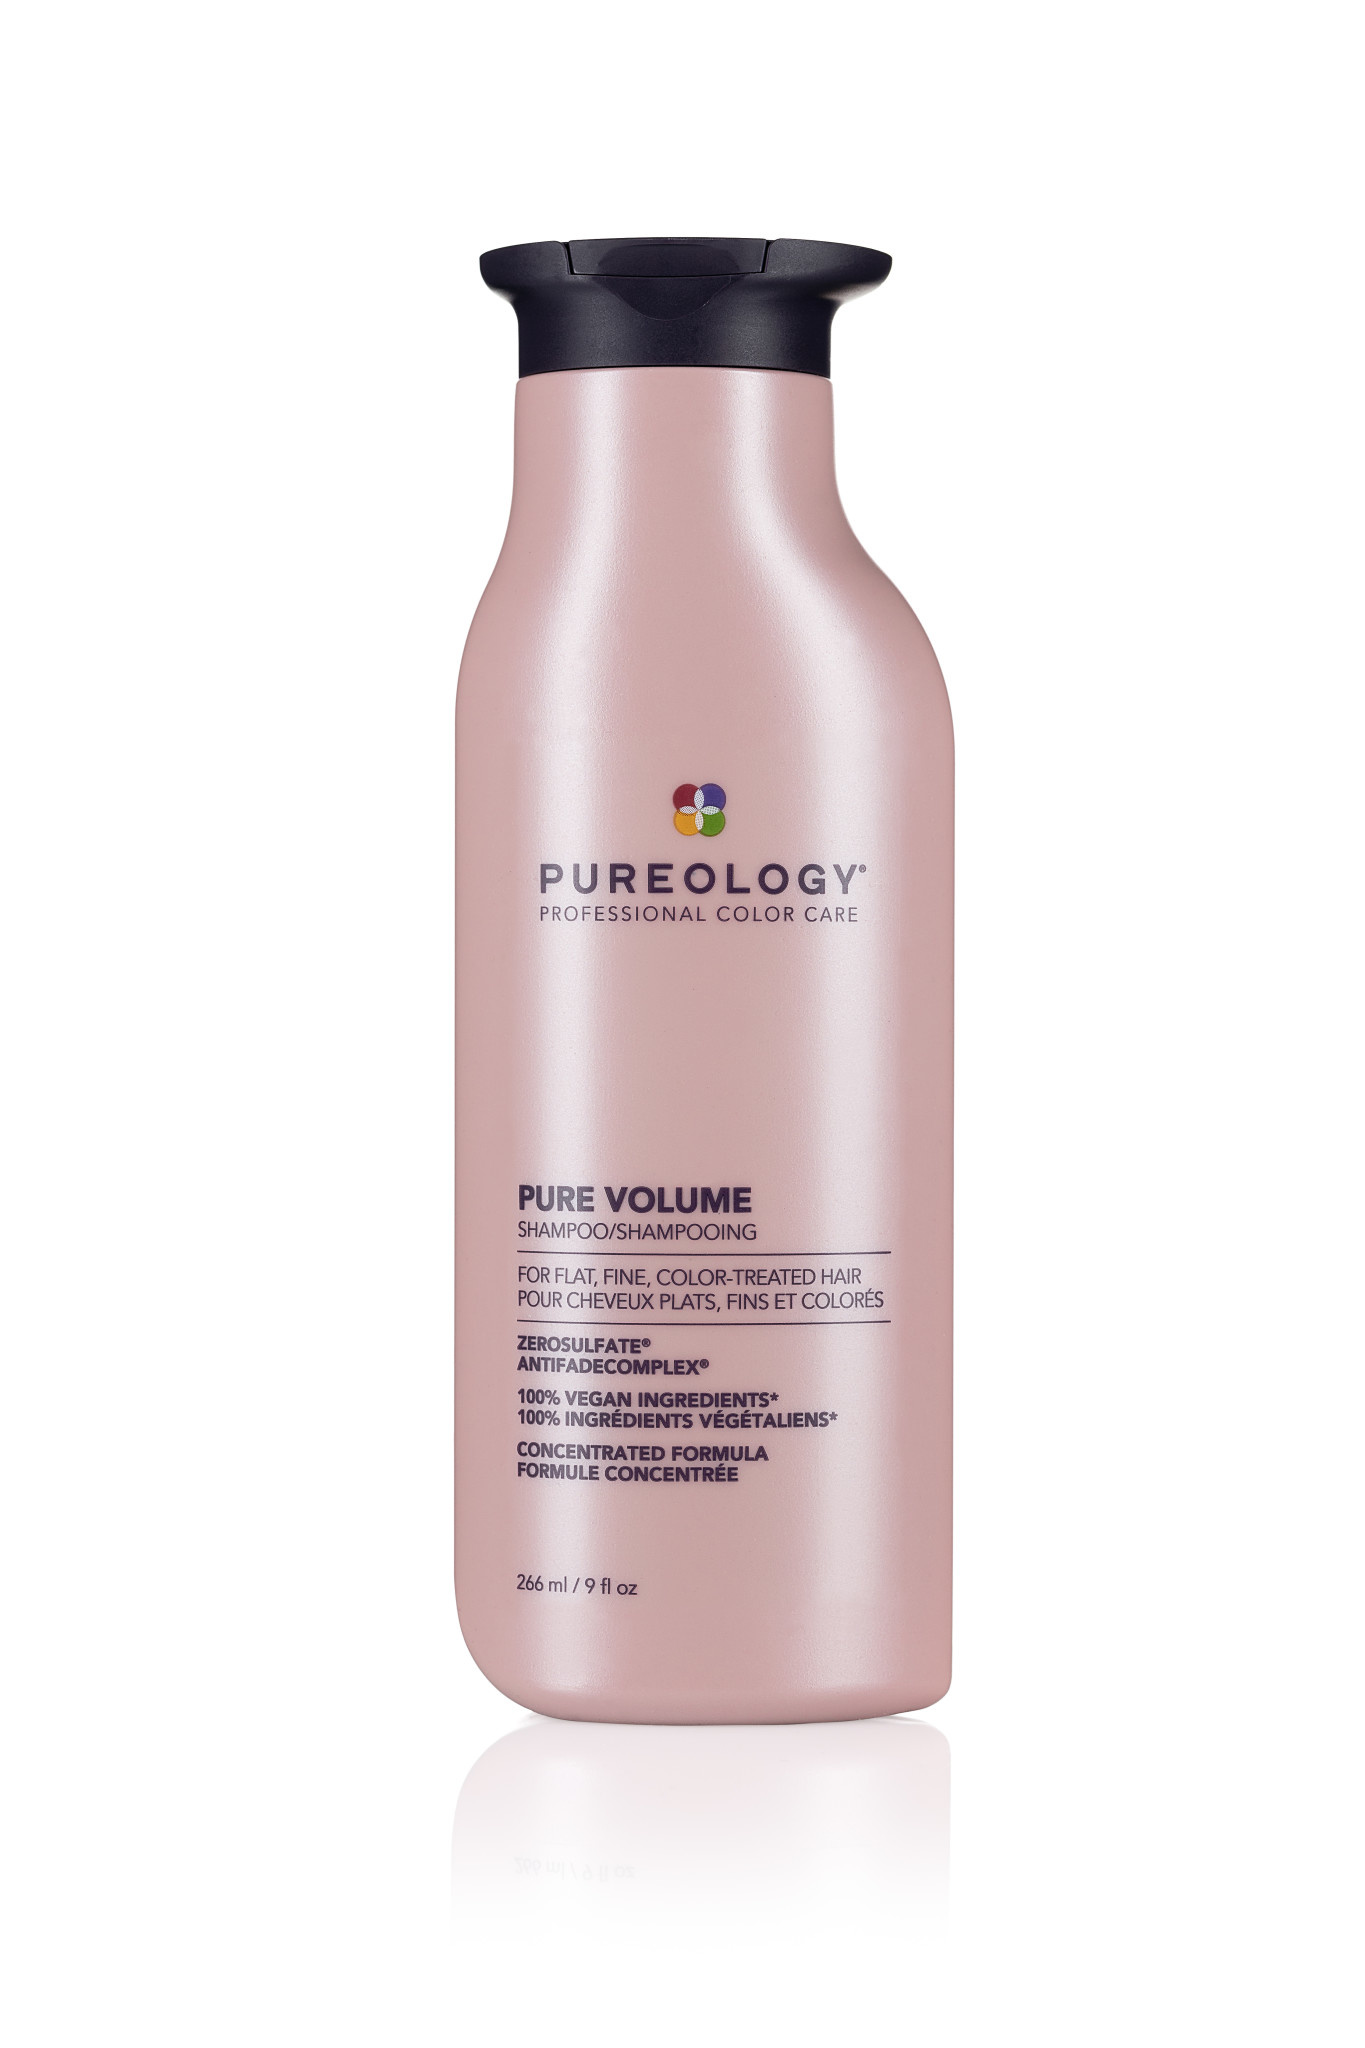 PUREOLOGY-PURE VOLUME Shampooing